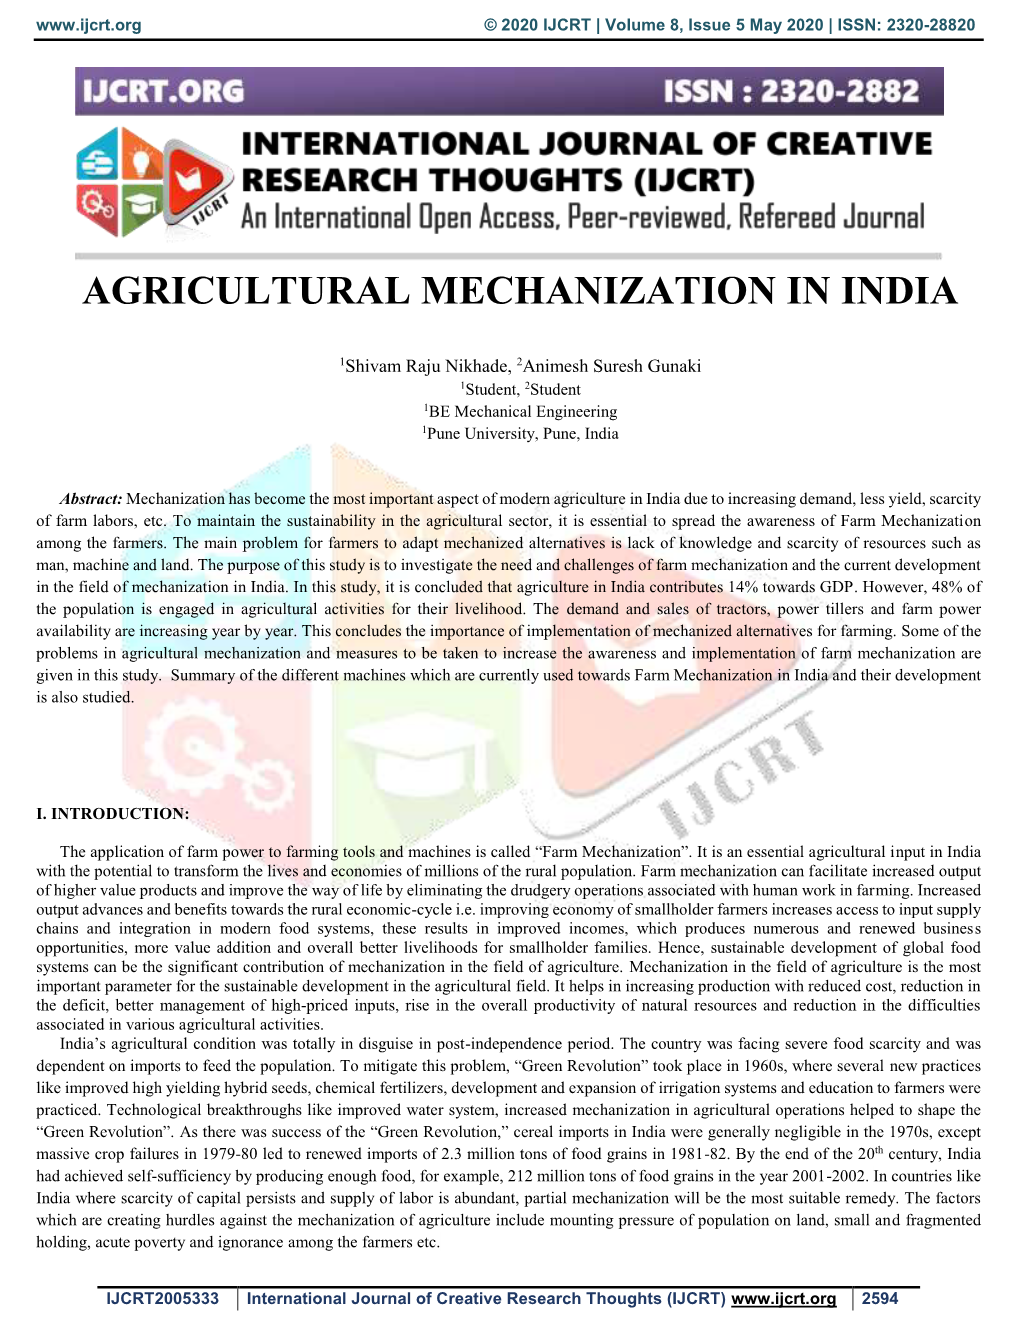 Agricultural Mechanization in India